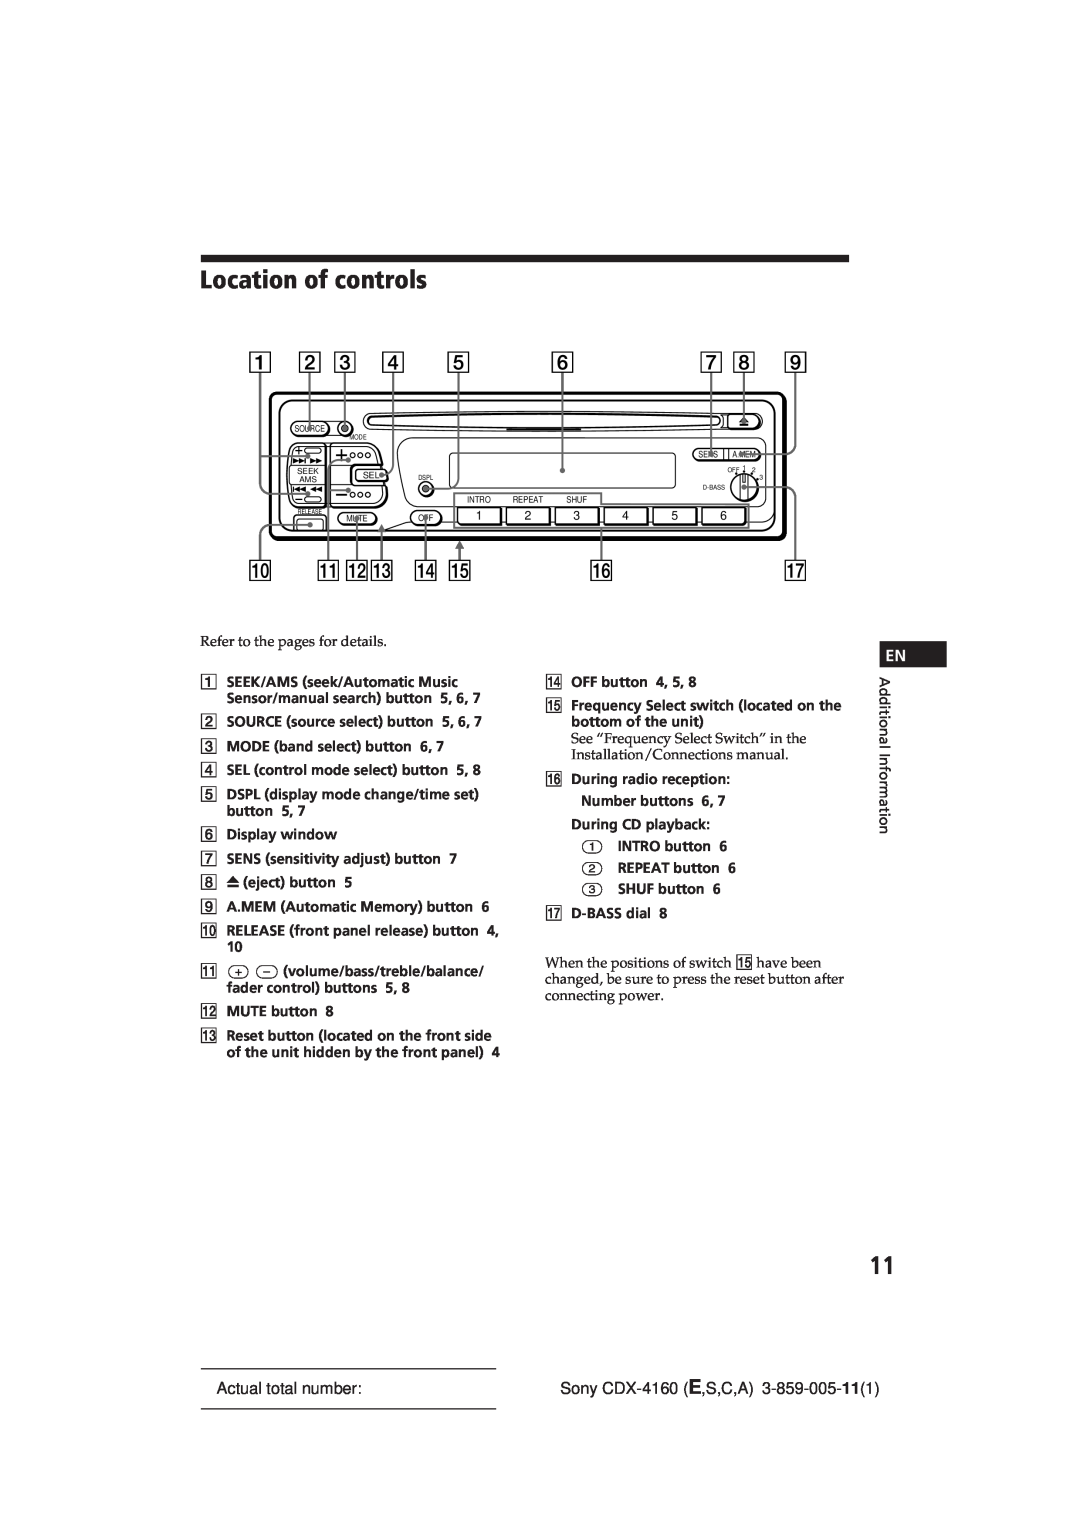 Sony operating instructions Location of controls, Actual total number, Sony CDX-4160E,S,C,A 